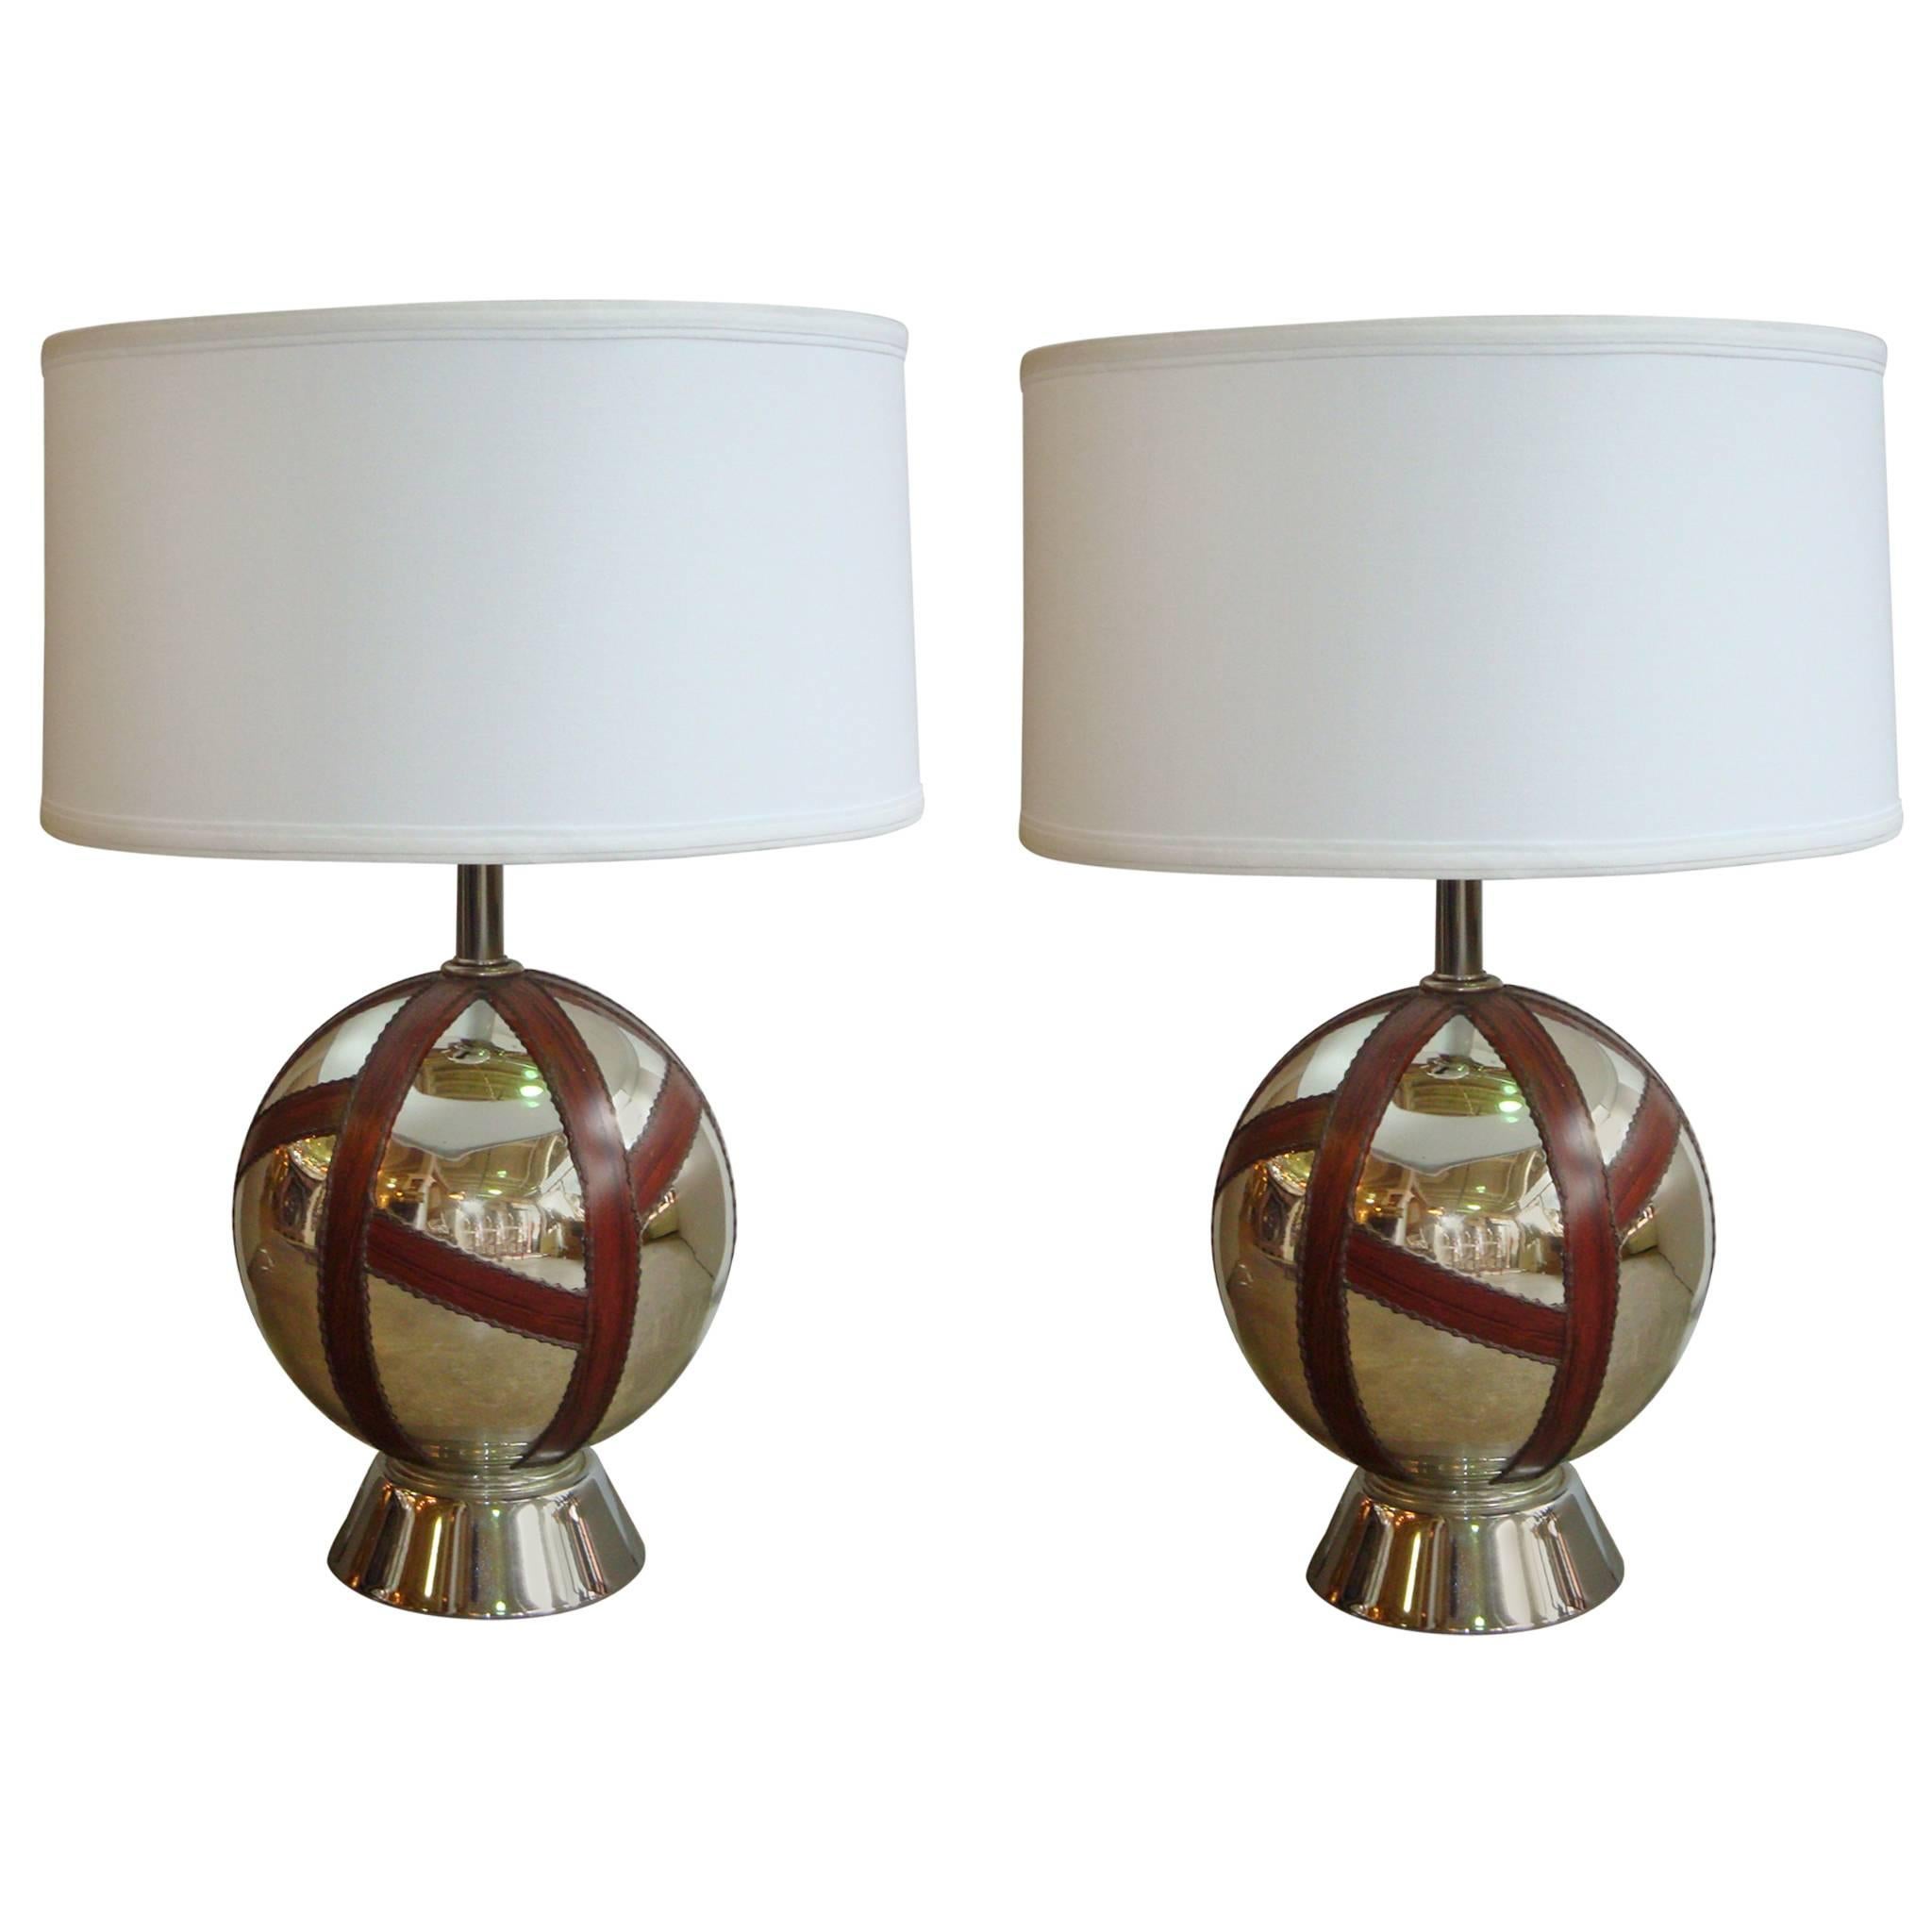 Pair of Mercury Glass and Chrome Lamps